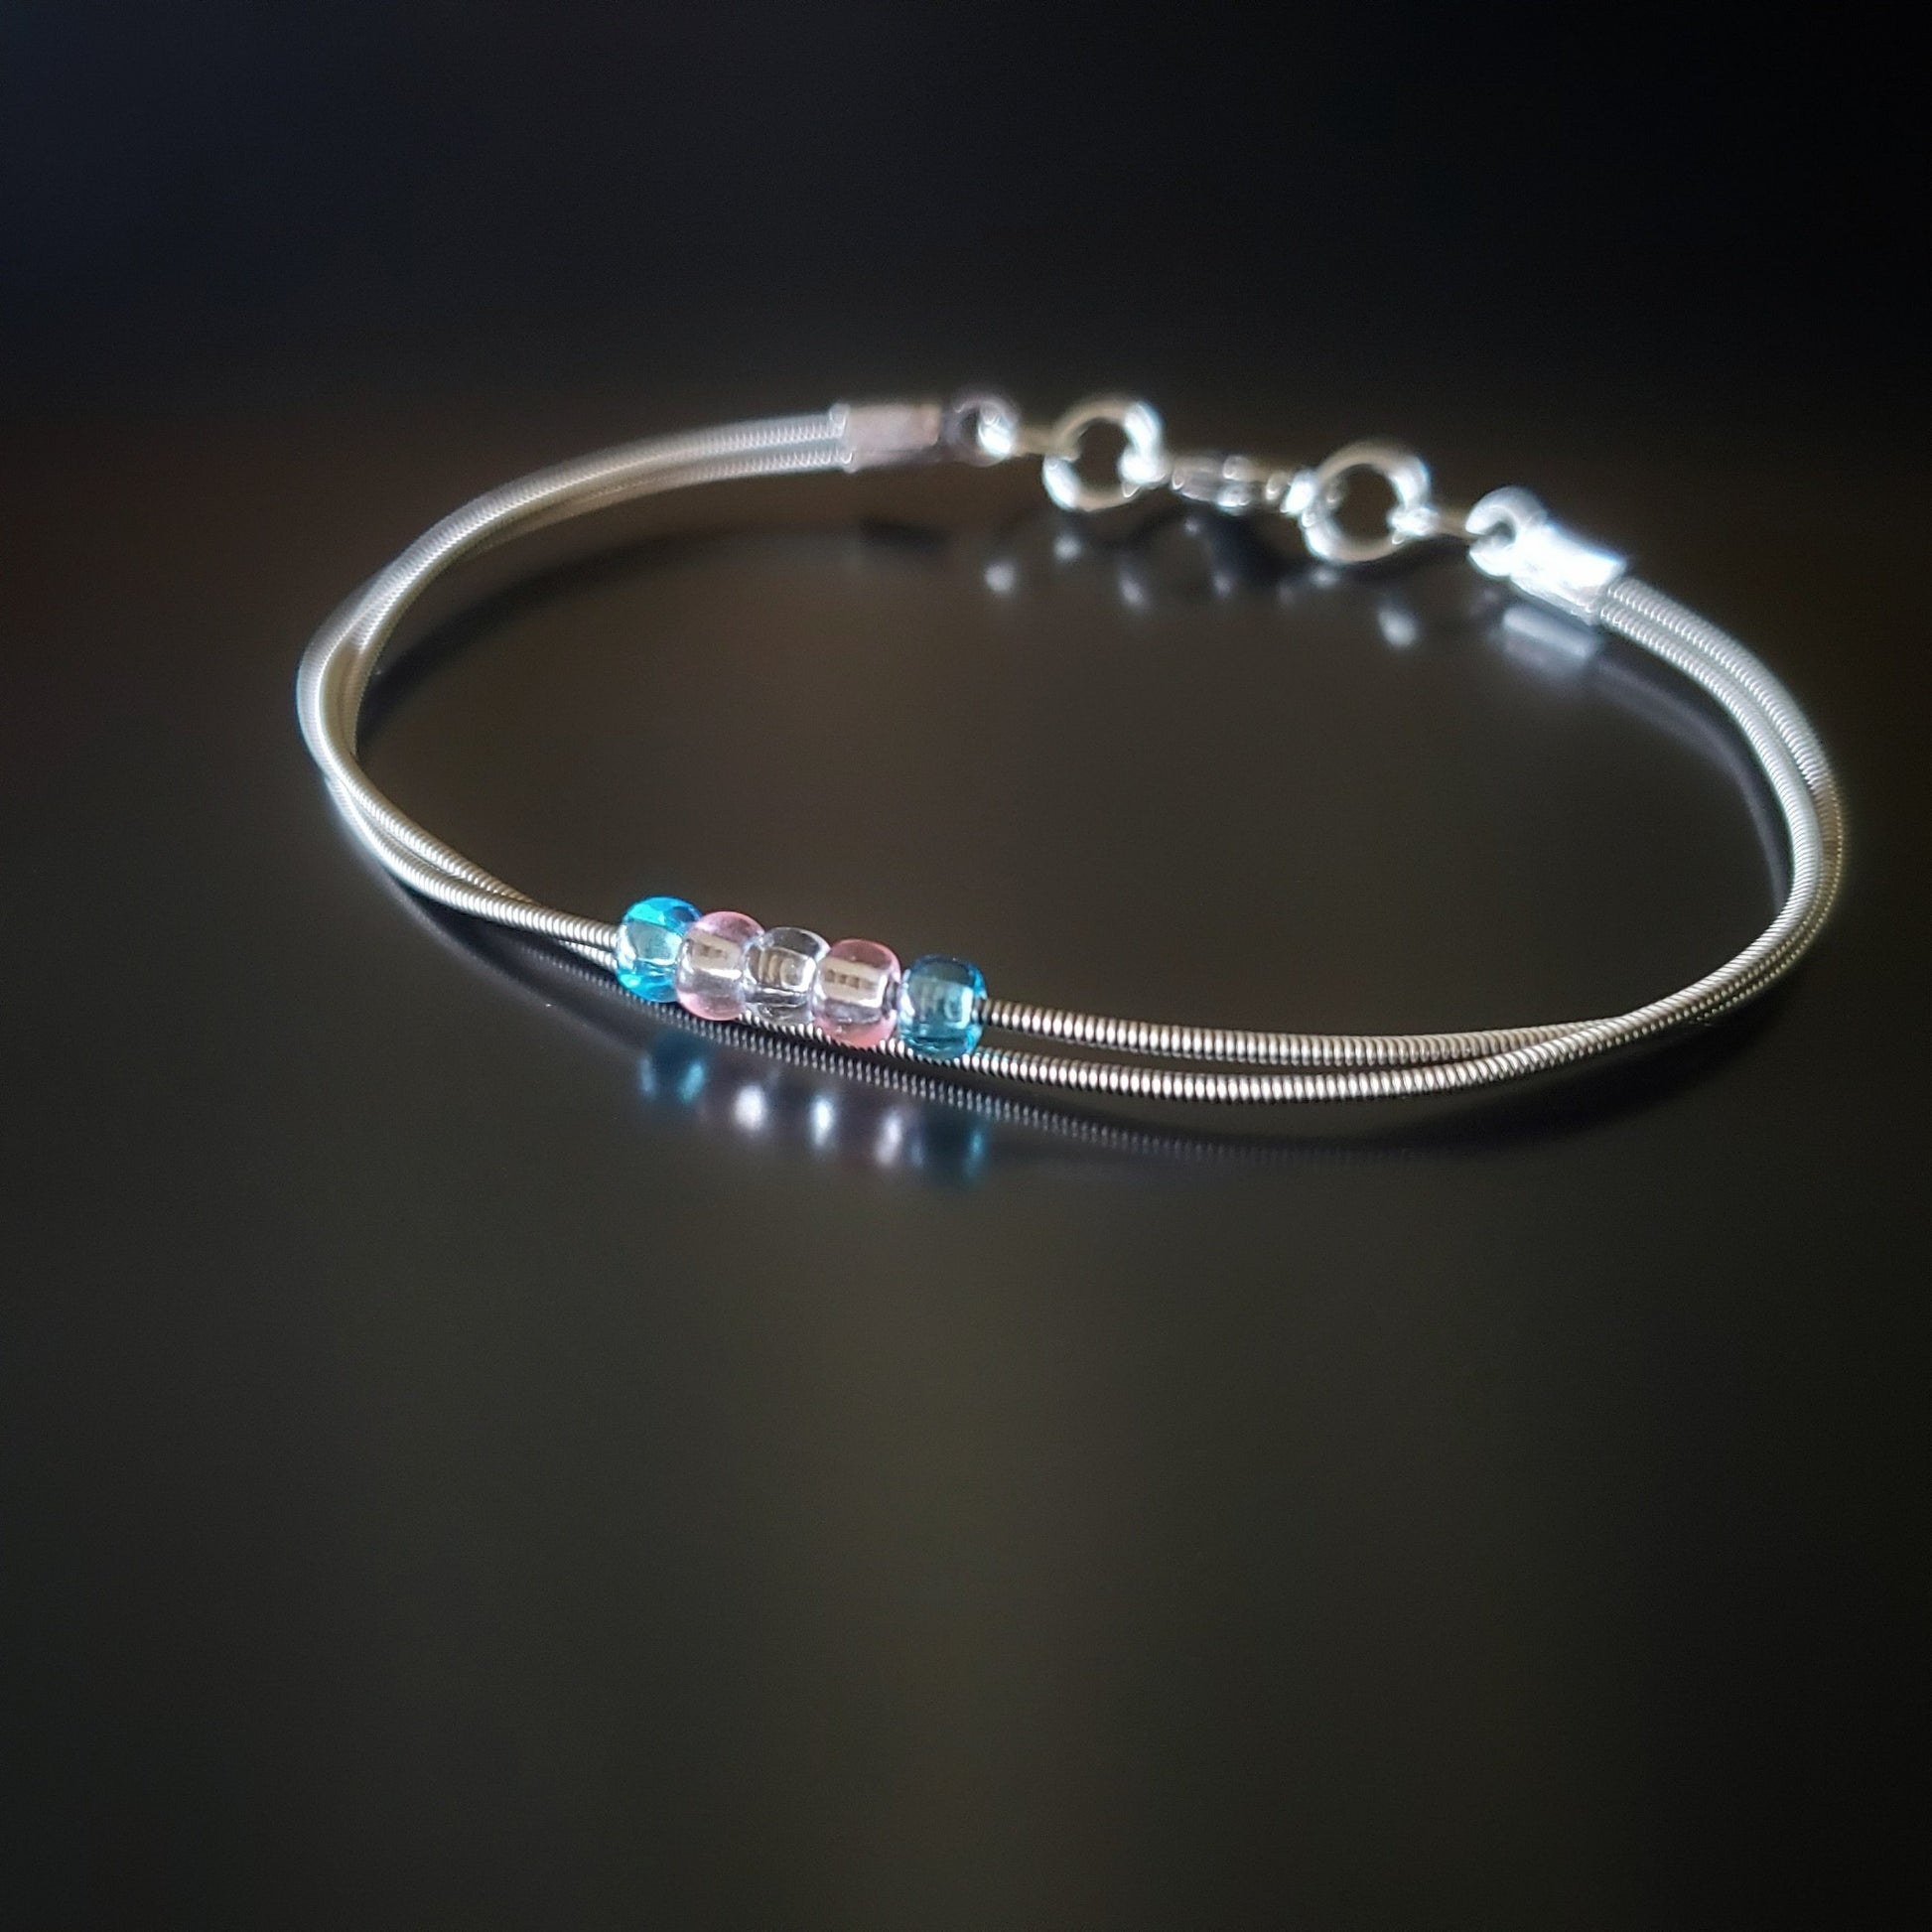 silver coloured clasp style bracelet made from upcycled guitar strings - there are 5 beads representing the colours of the transgender pride flag - 2 blue, 2 pink and 1 white